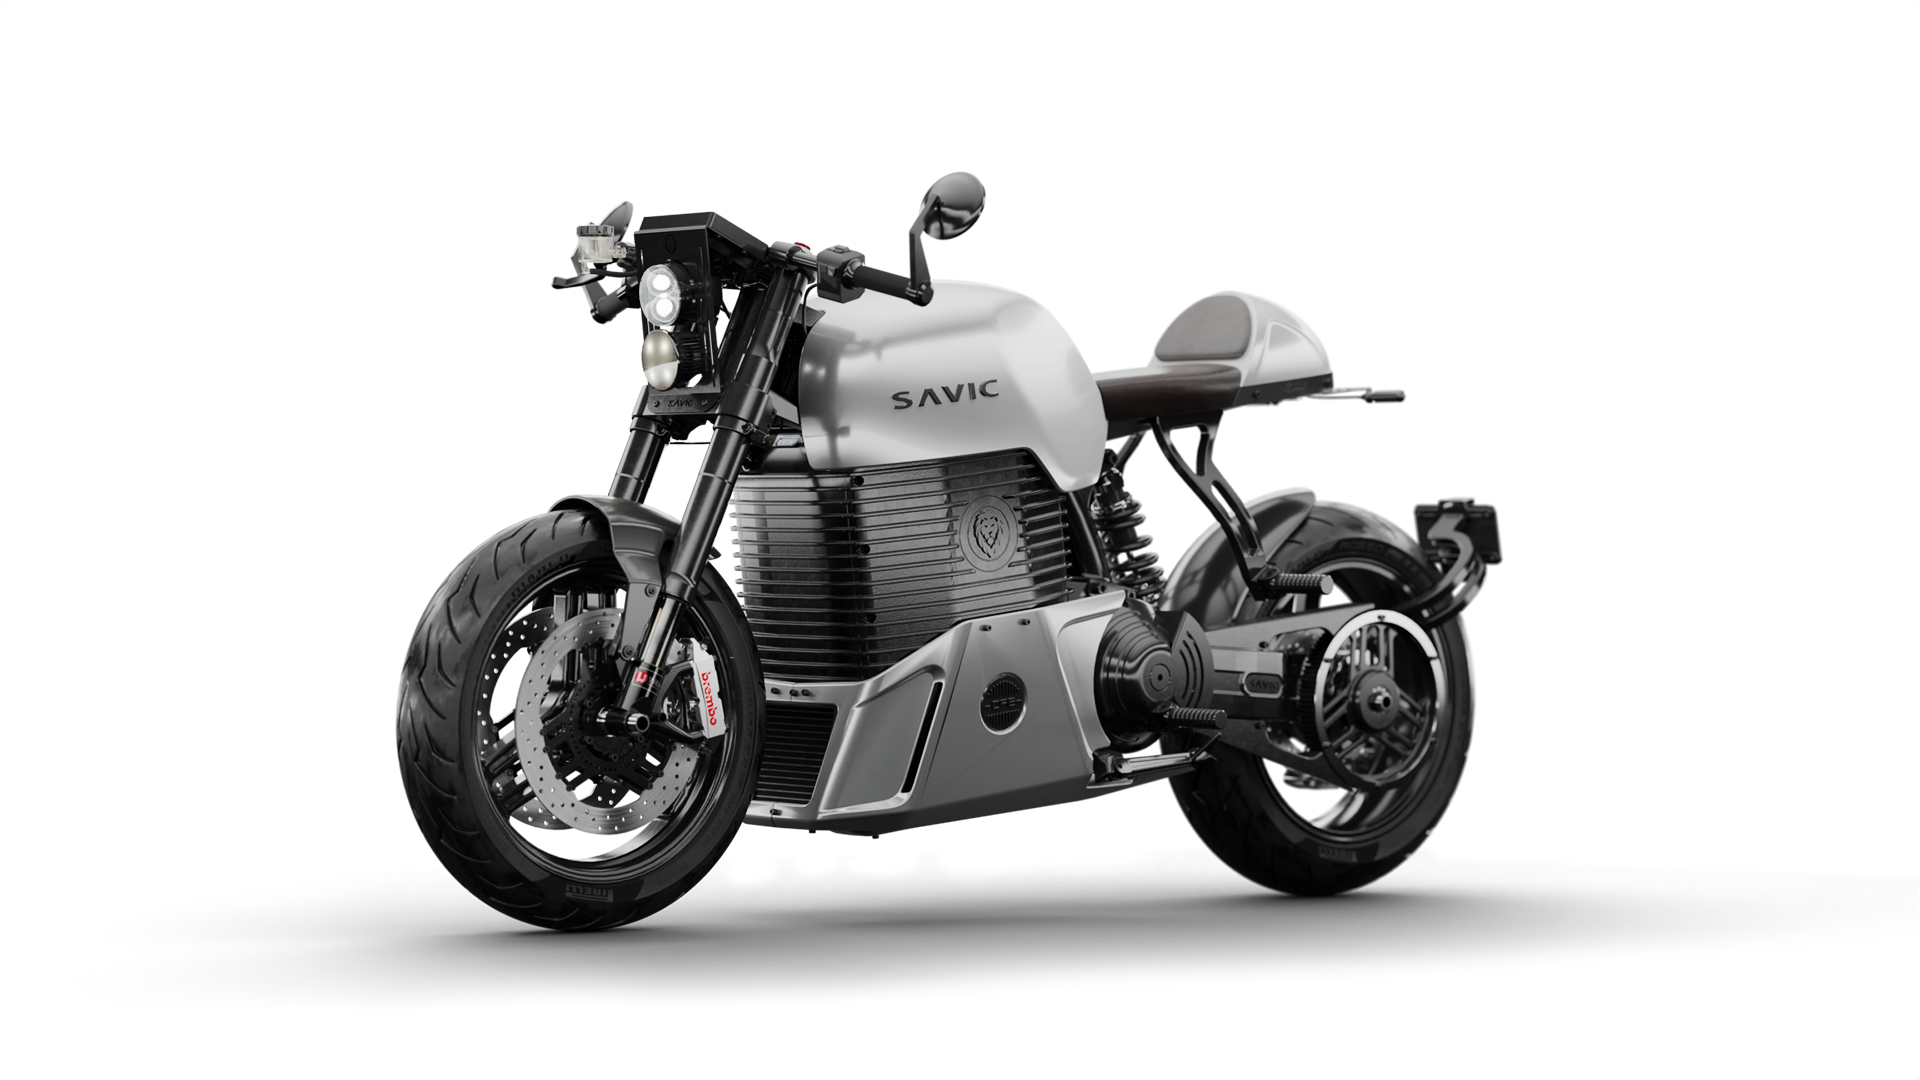 Side image of 3d model of the C-Series cafe racer motorcycle